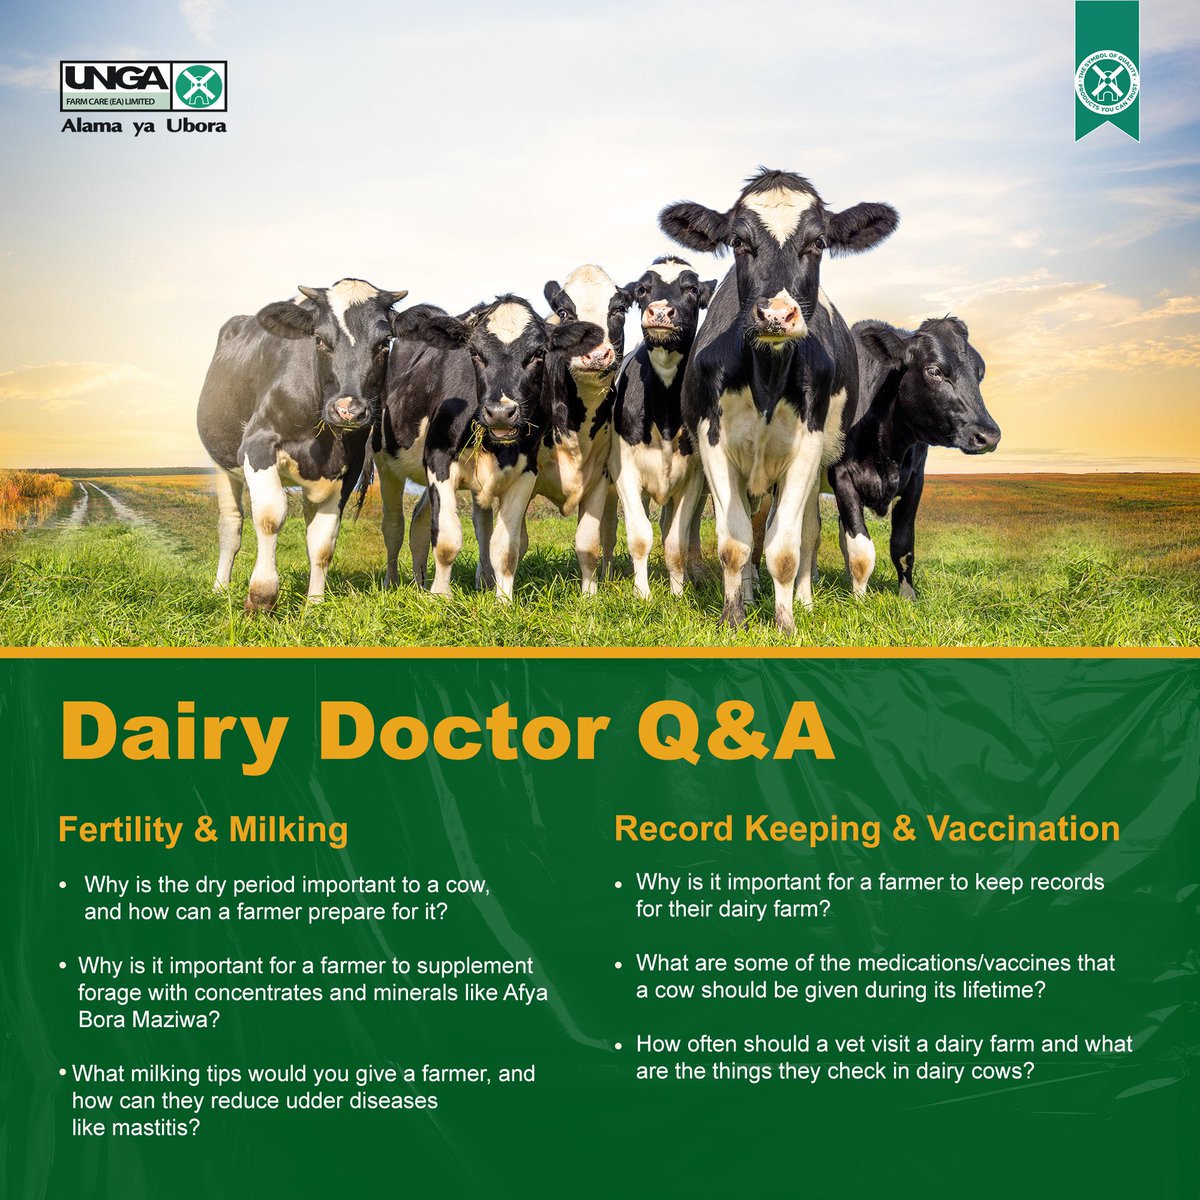 Tunawaletea leakage ya dairy farming kesho asubuhi on Facebook Live at 9:00am.

Get your pens and notebooks out, daktari wa ng'ombe anakuja na the complete guide on feeding and management of your dairy cows.

#Fugo #DairyFarming #AskADoctor #UngaFarmFeeds